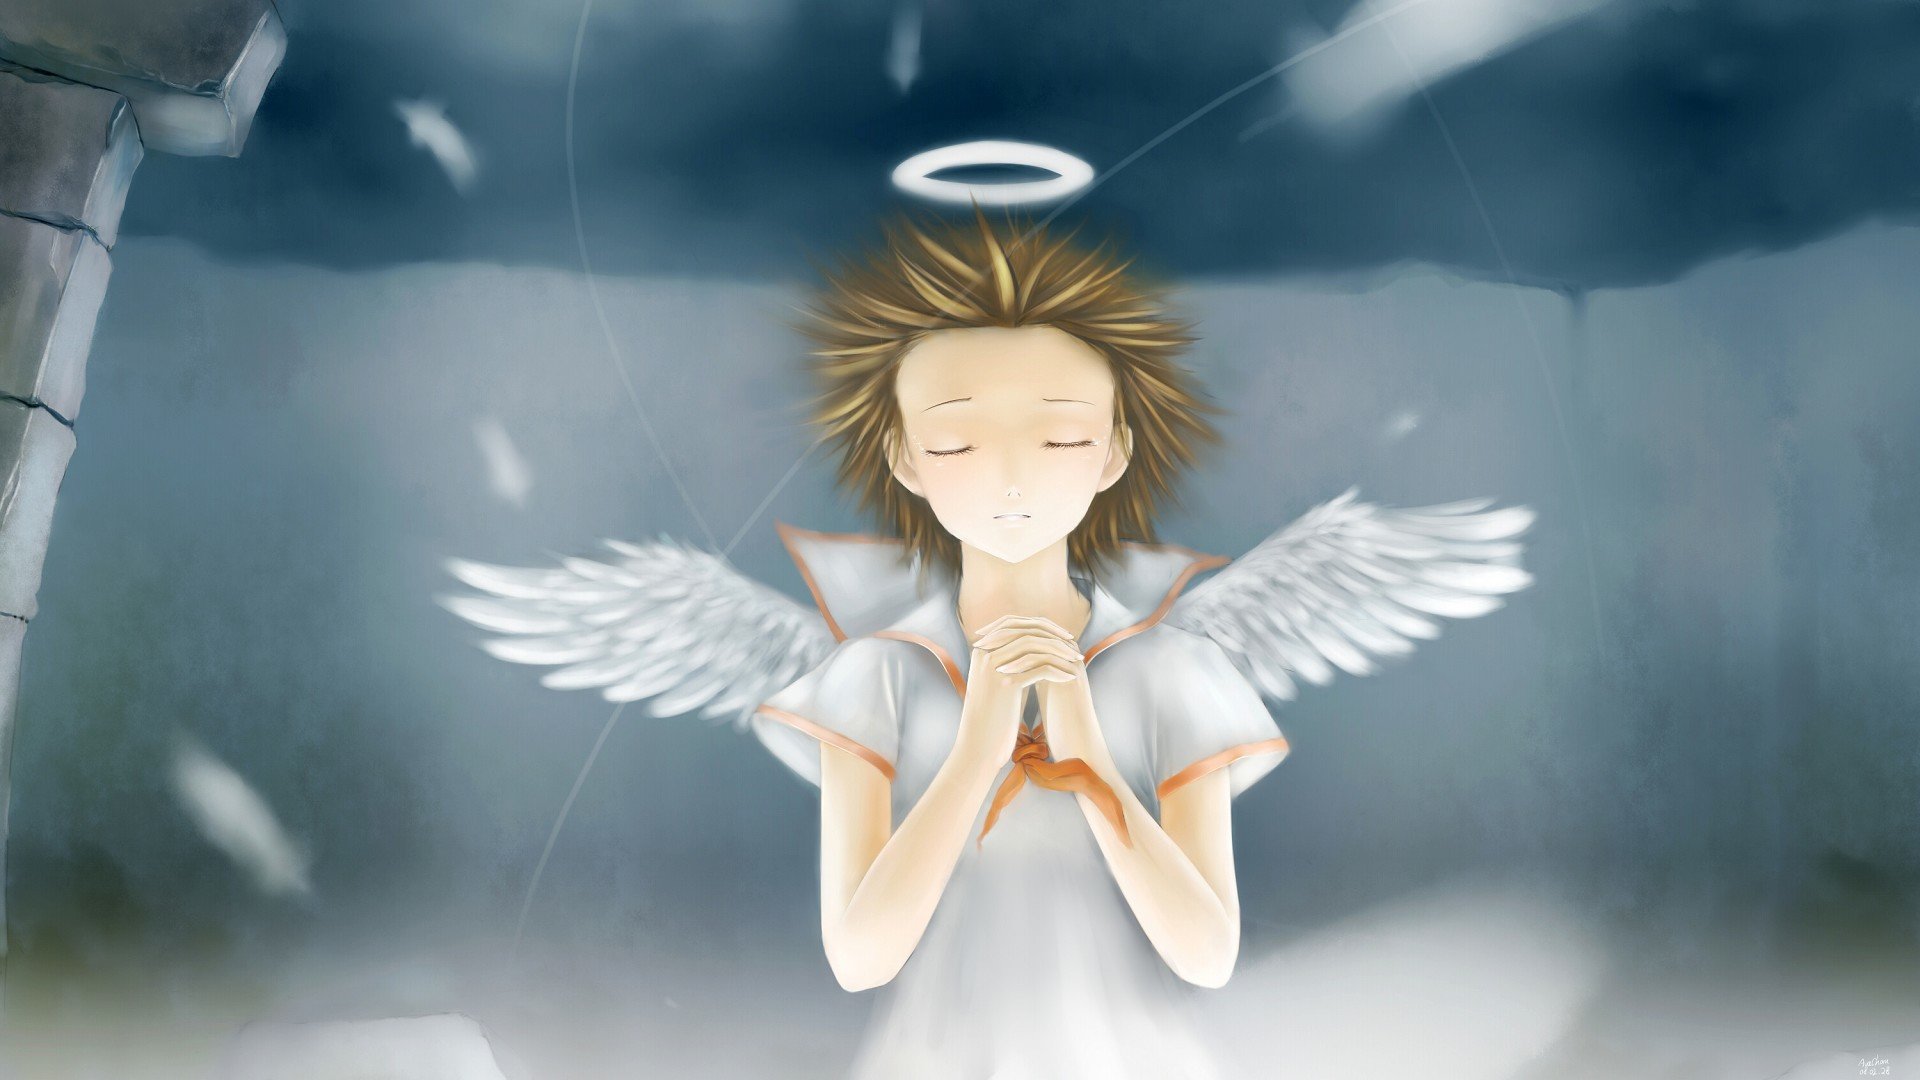 Awesome Haibane Renmei free background ID:467860 for hd 1920x1080 computer